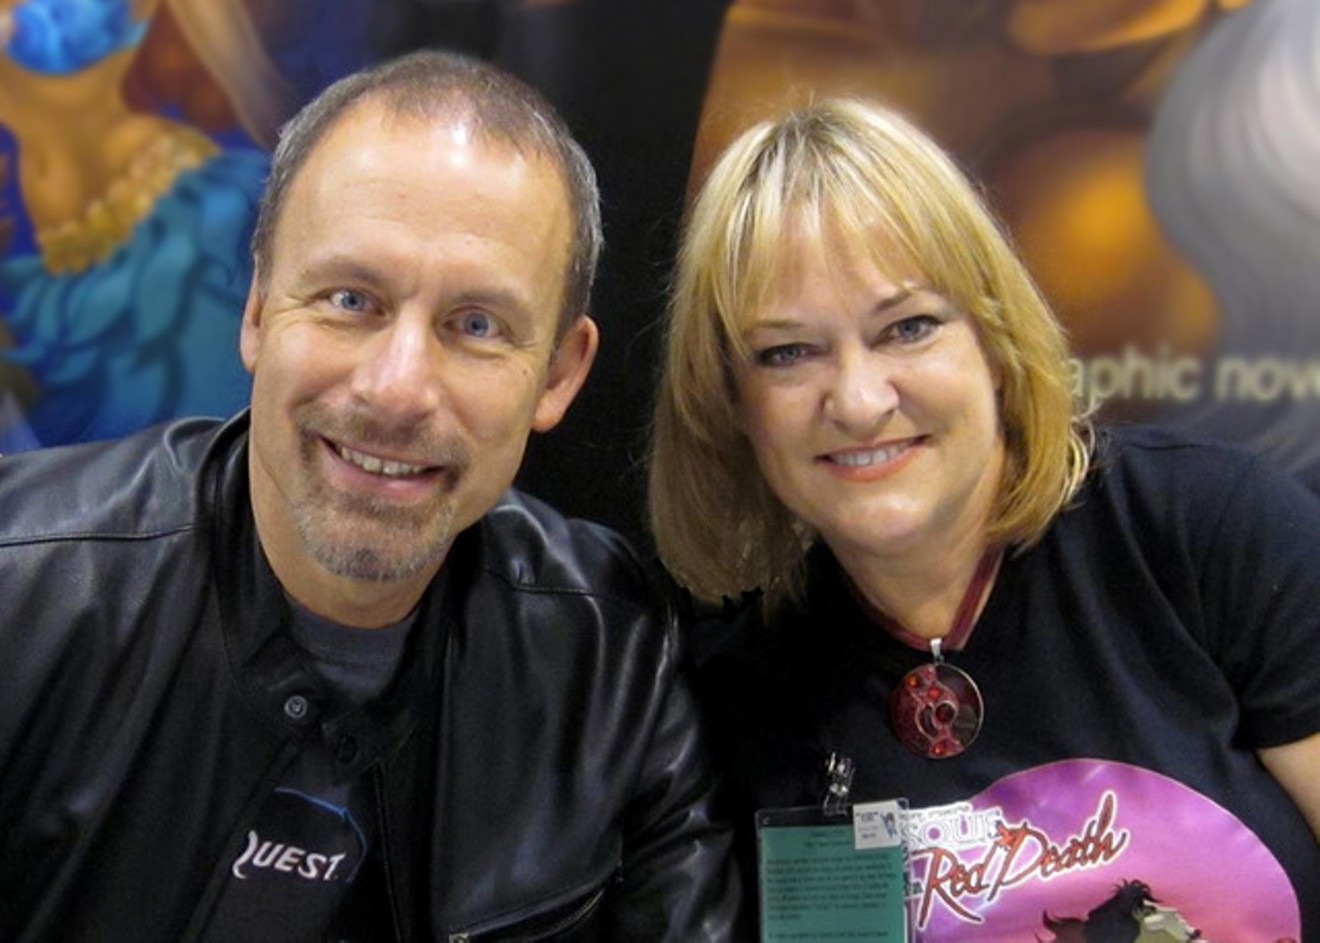 Richard and Wendy Pini (Elfquest) will be featured guests at DiNK the weekend of April 13-14.